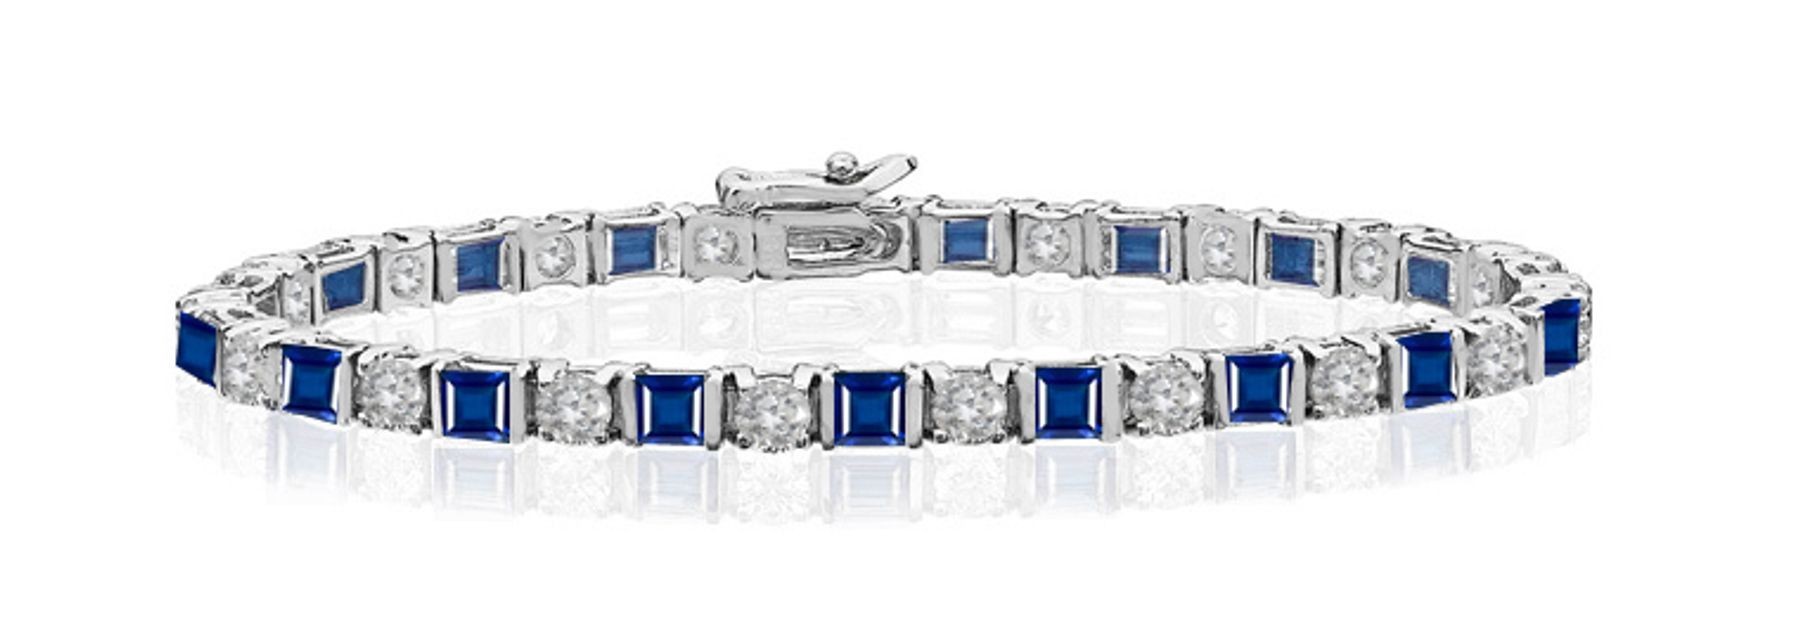 Premier Designer Colored Gemstone Jewelry Collection: New Blue Sapphire & Diamond Bracelet and Necklace